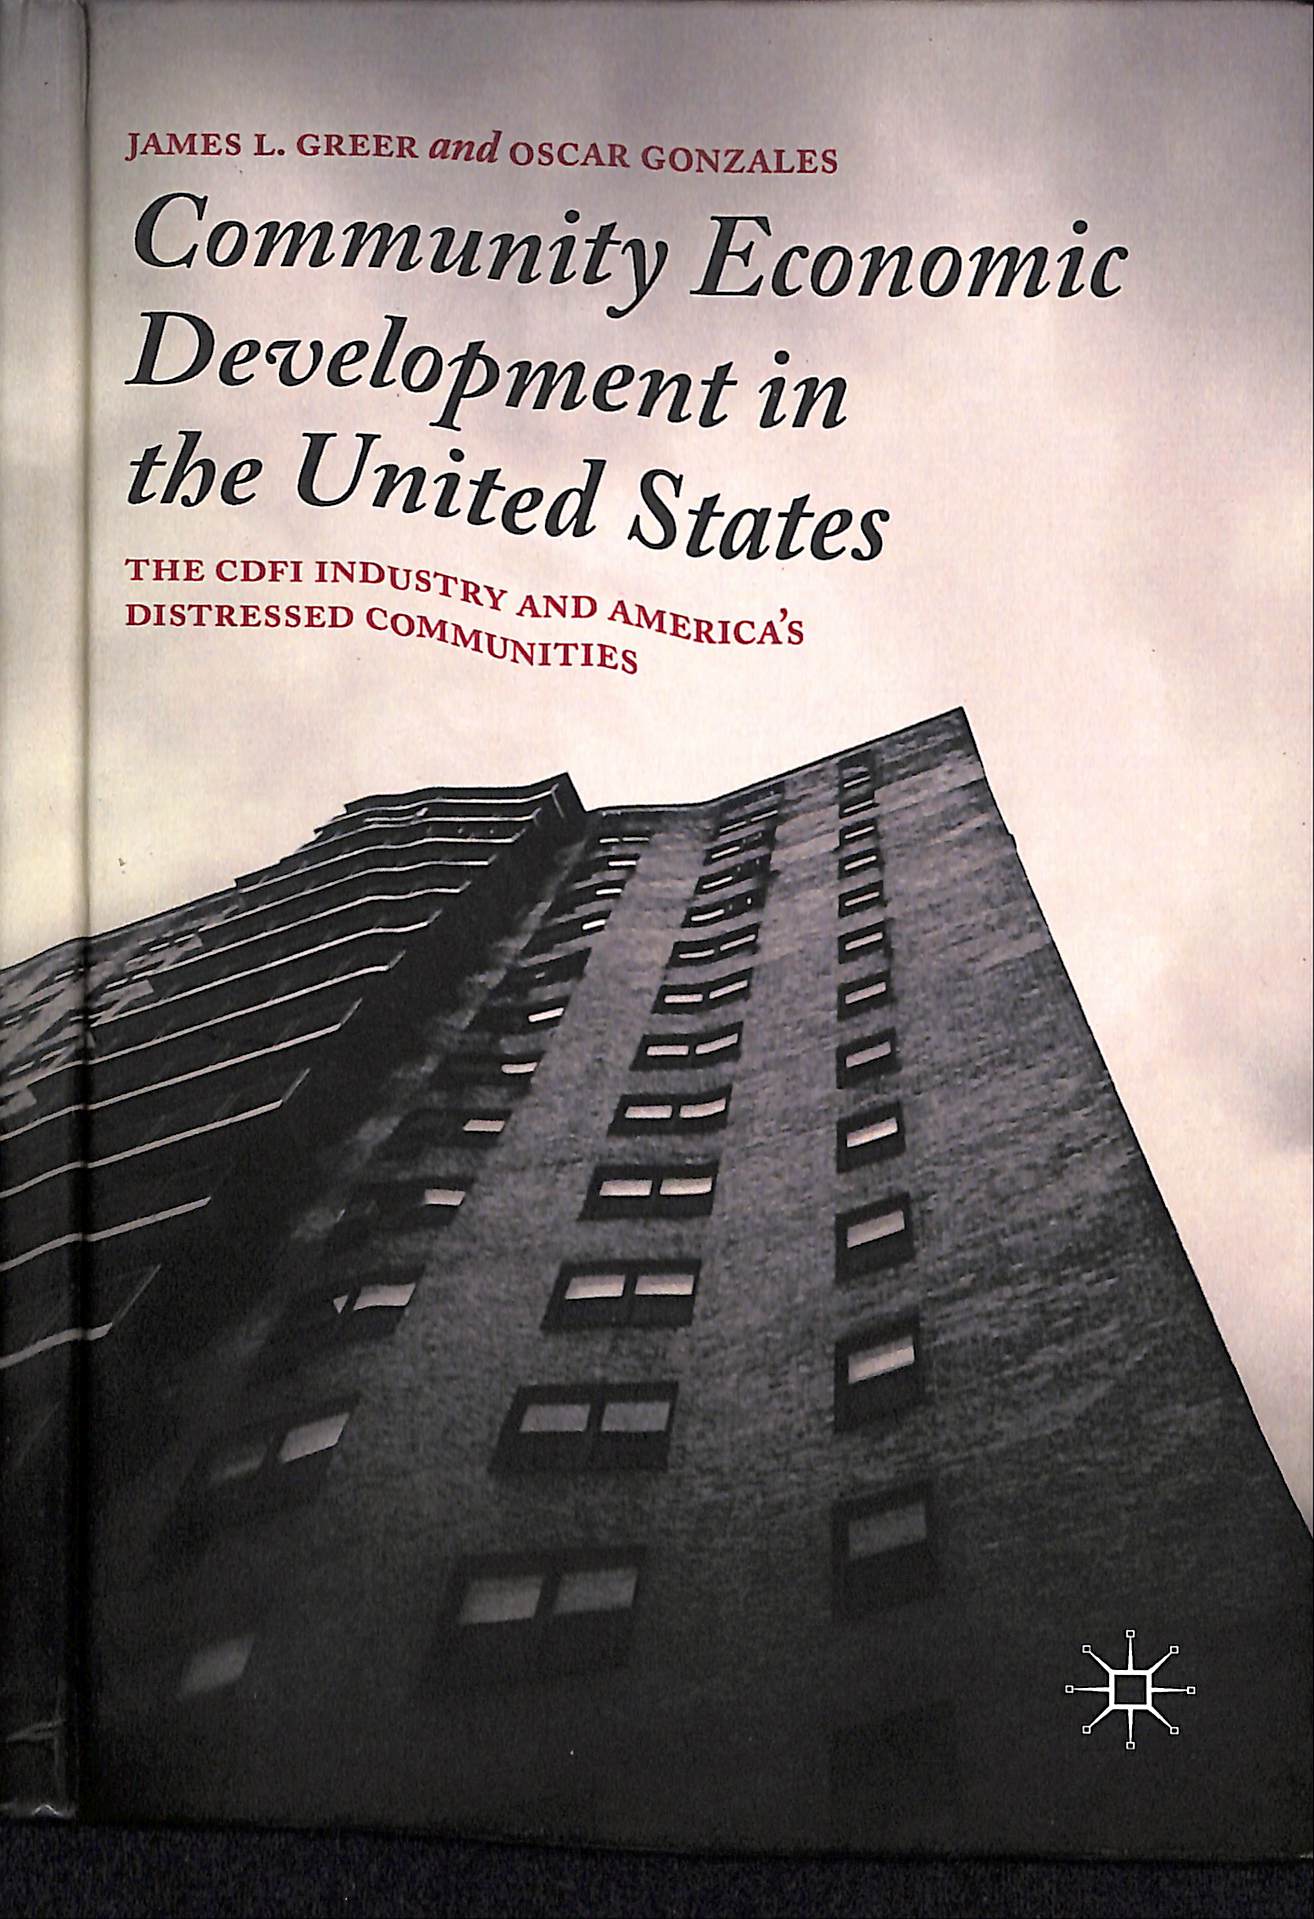 Community economic development in the United States the CDFI industry and America's distressed communities